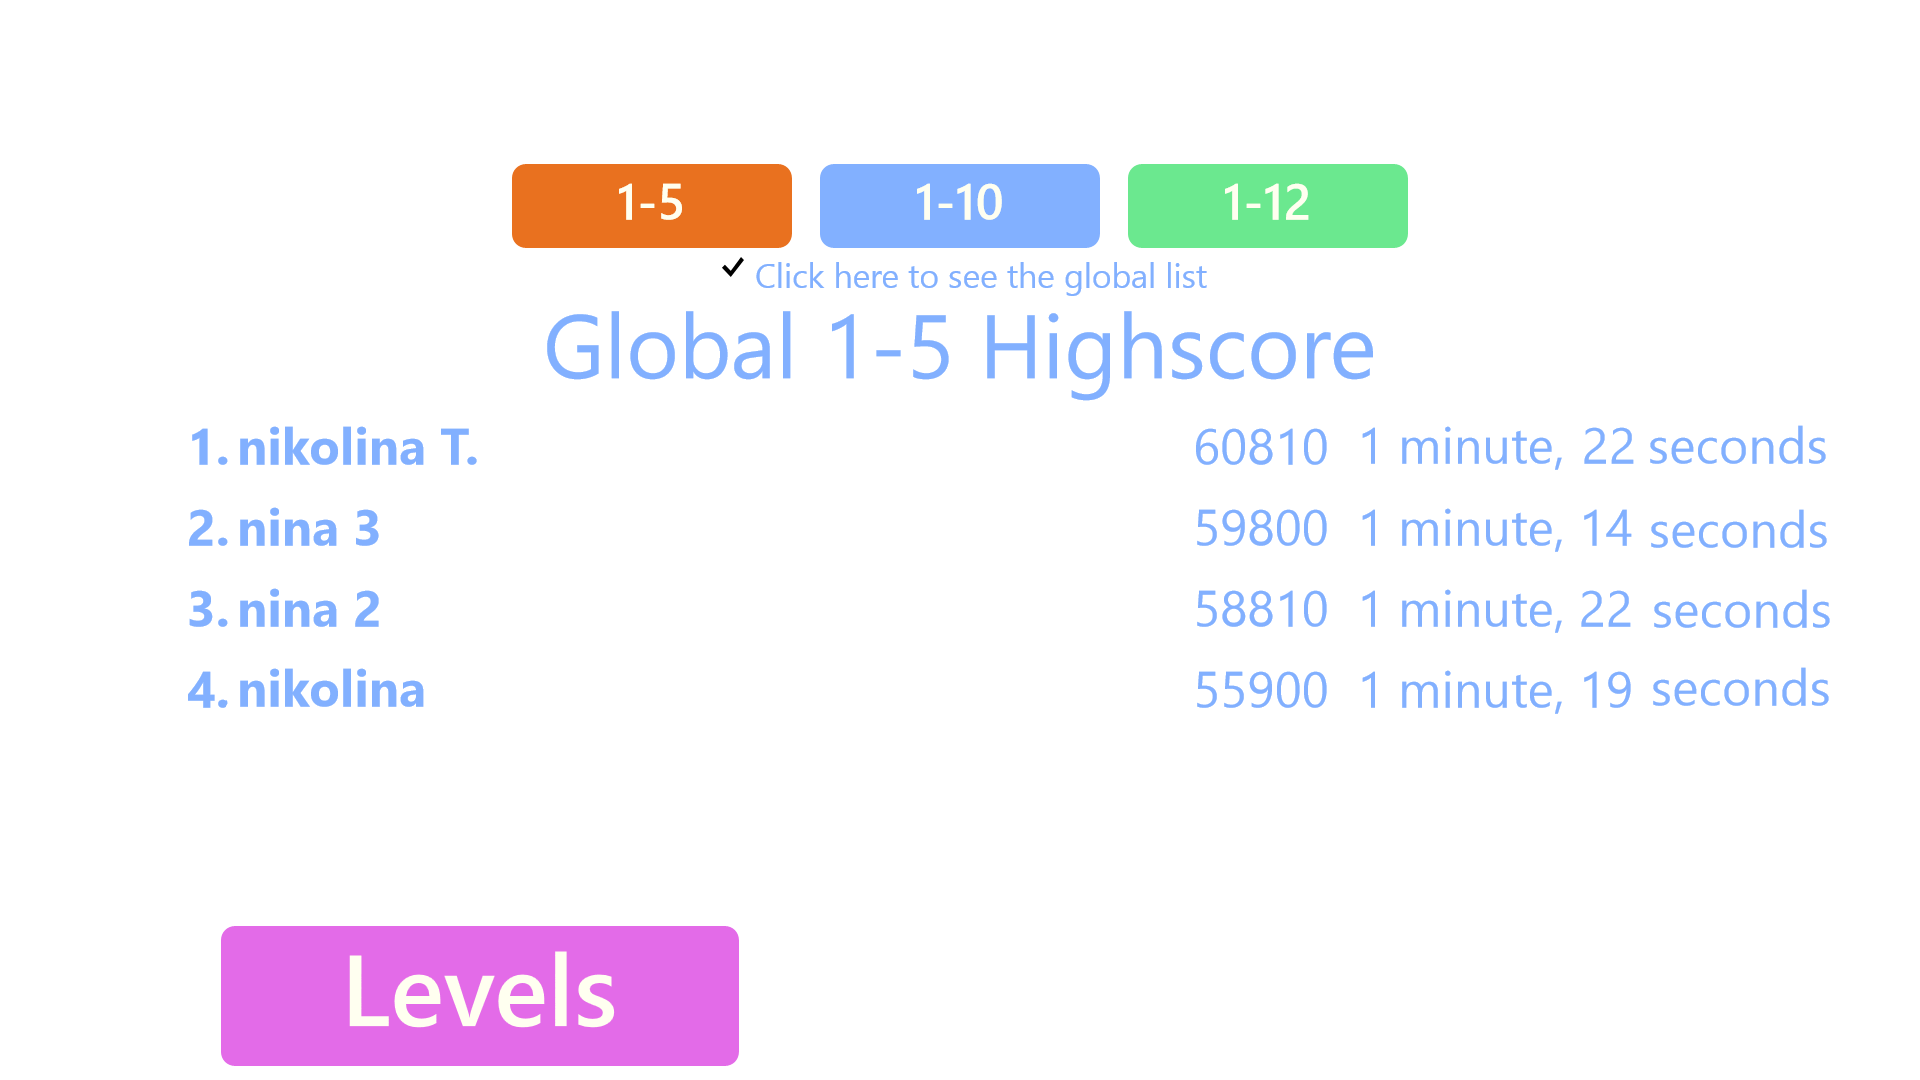 There is a highscore table where you can compete with your best result or compare with the global list